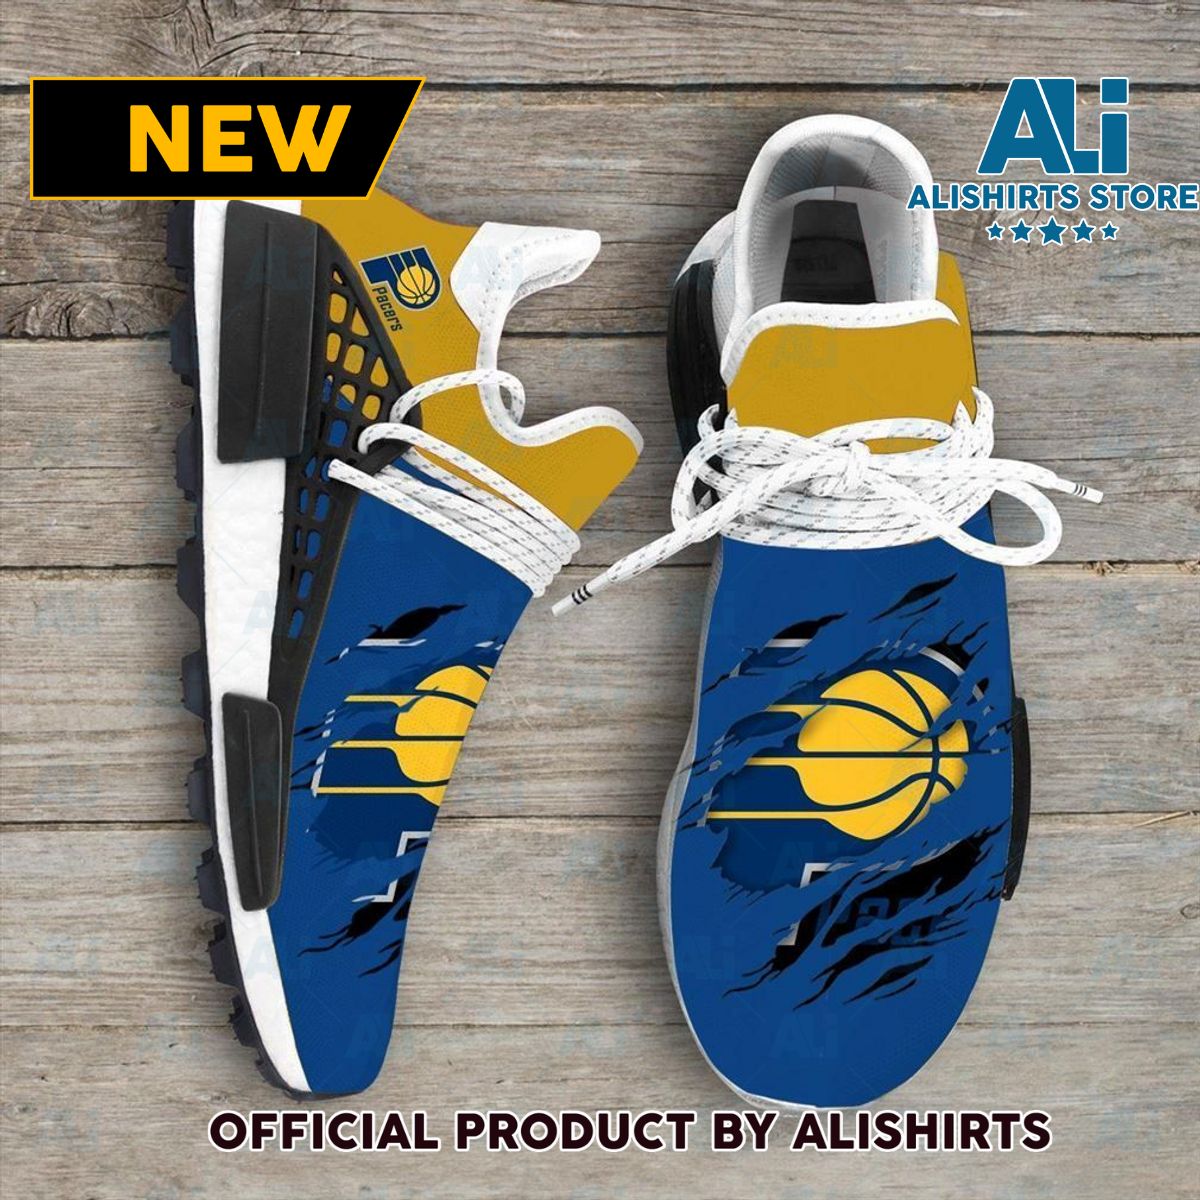 Indiana Pacers NBA Sport Teams NMD Human Race Adidas NMD Sneakers